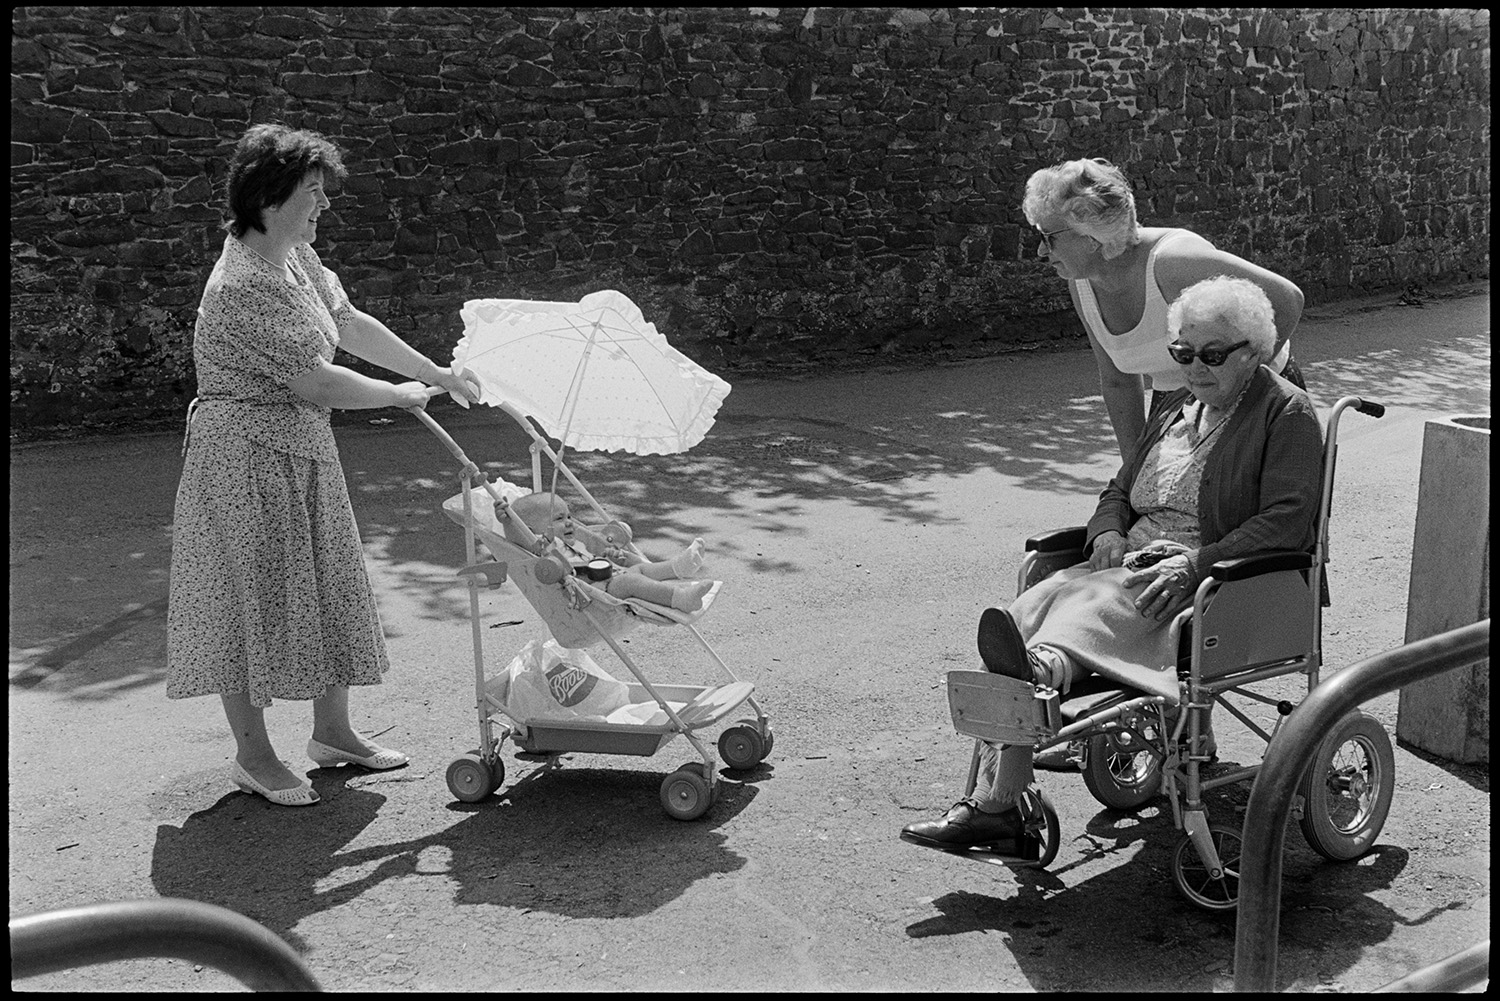 Woman mother and baby chatting to elderly woman in wheelchair.
[Chulmleigh street scene with two women, one in a wheelchair, talking to a woman with a baby in a pushchair.